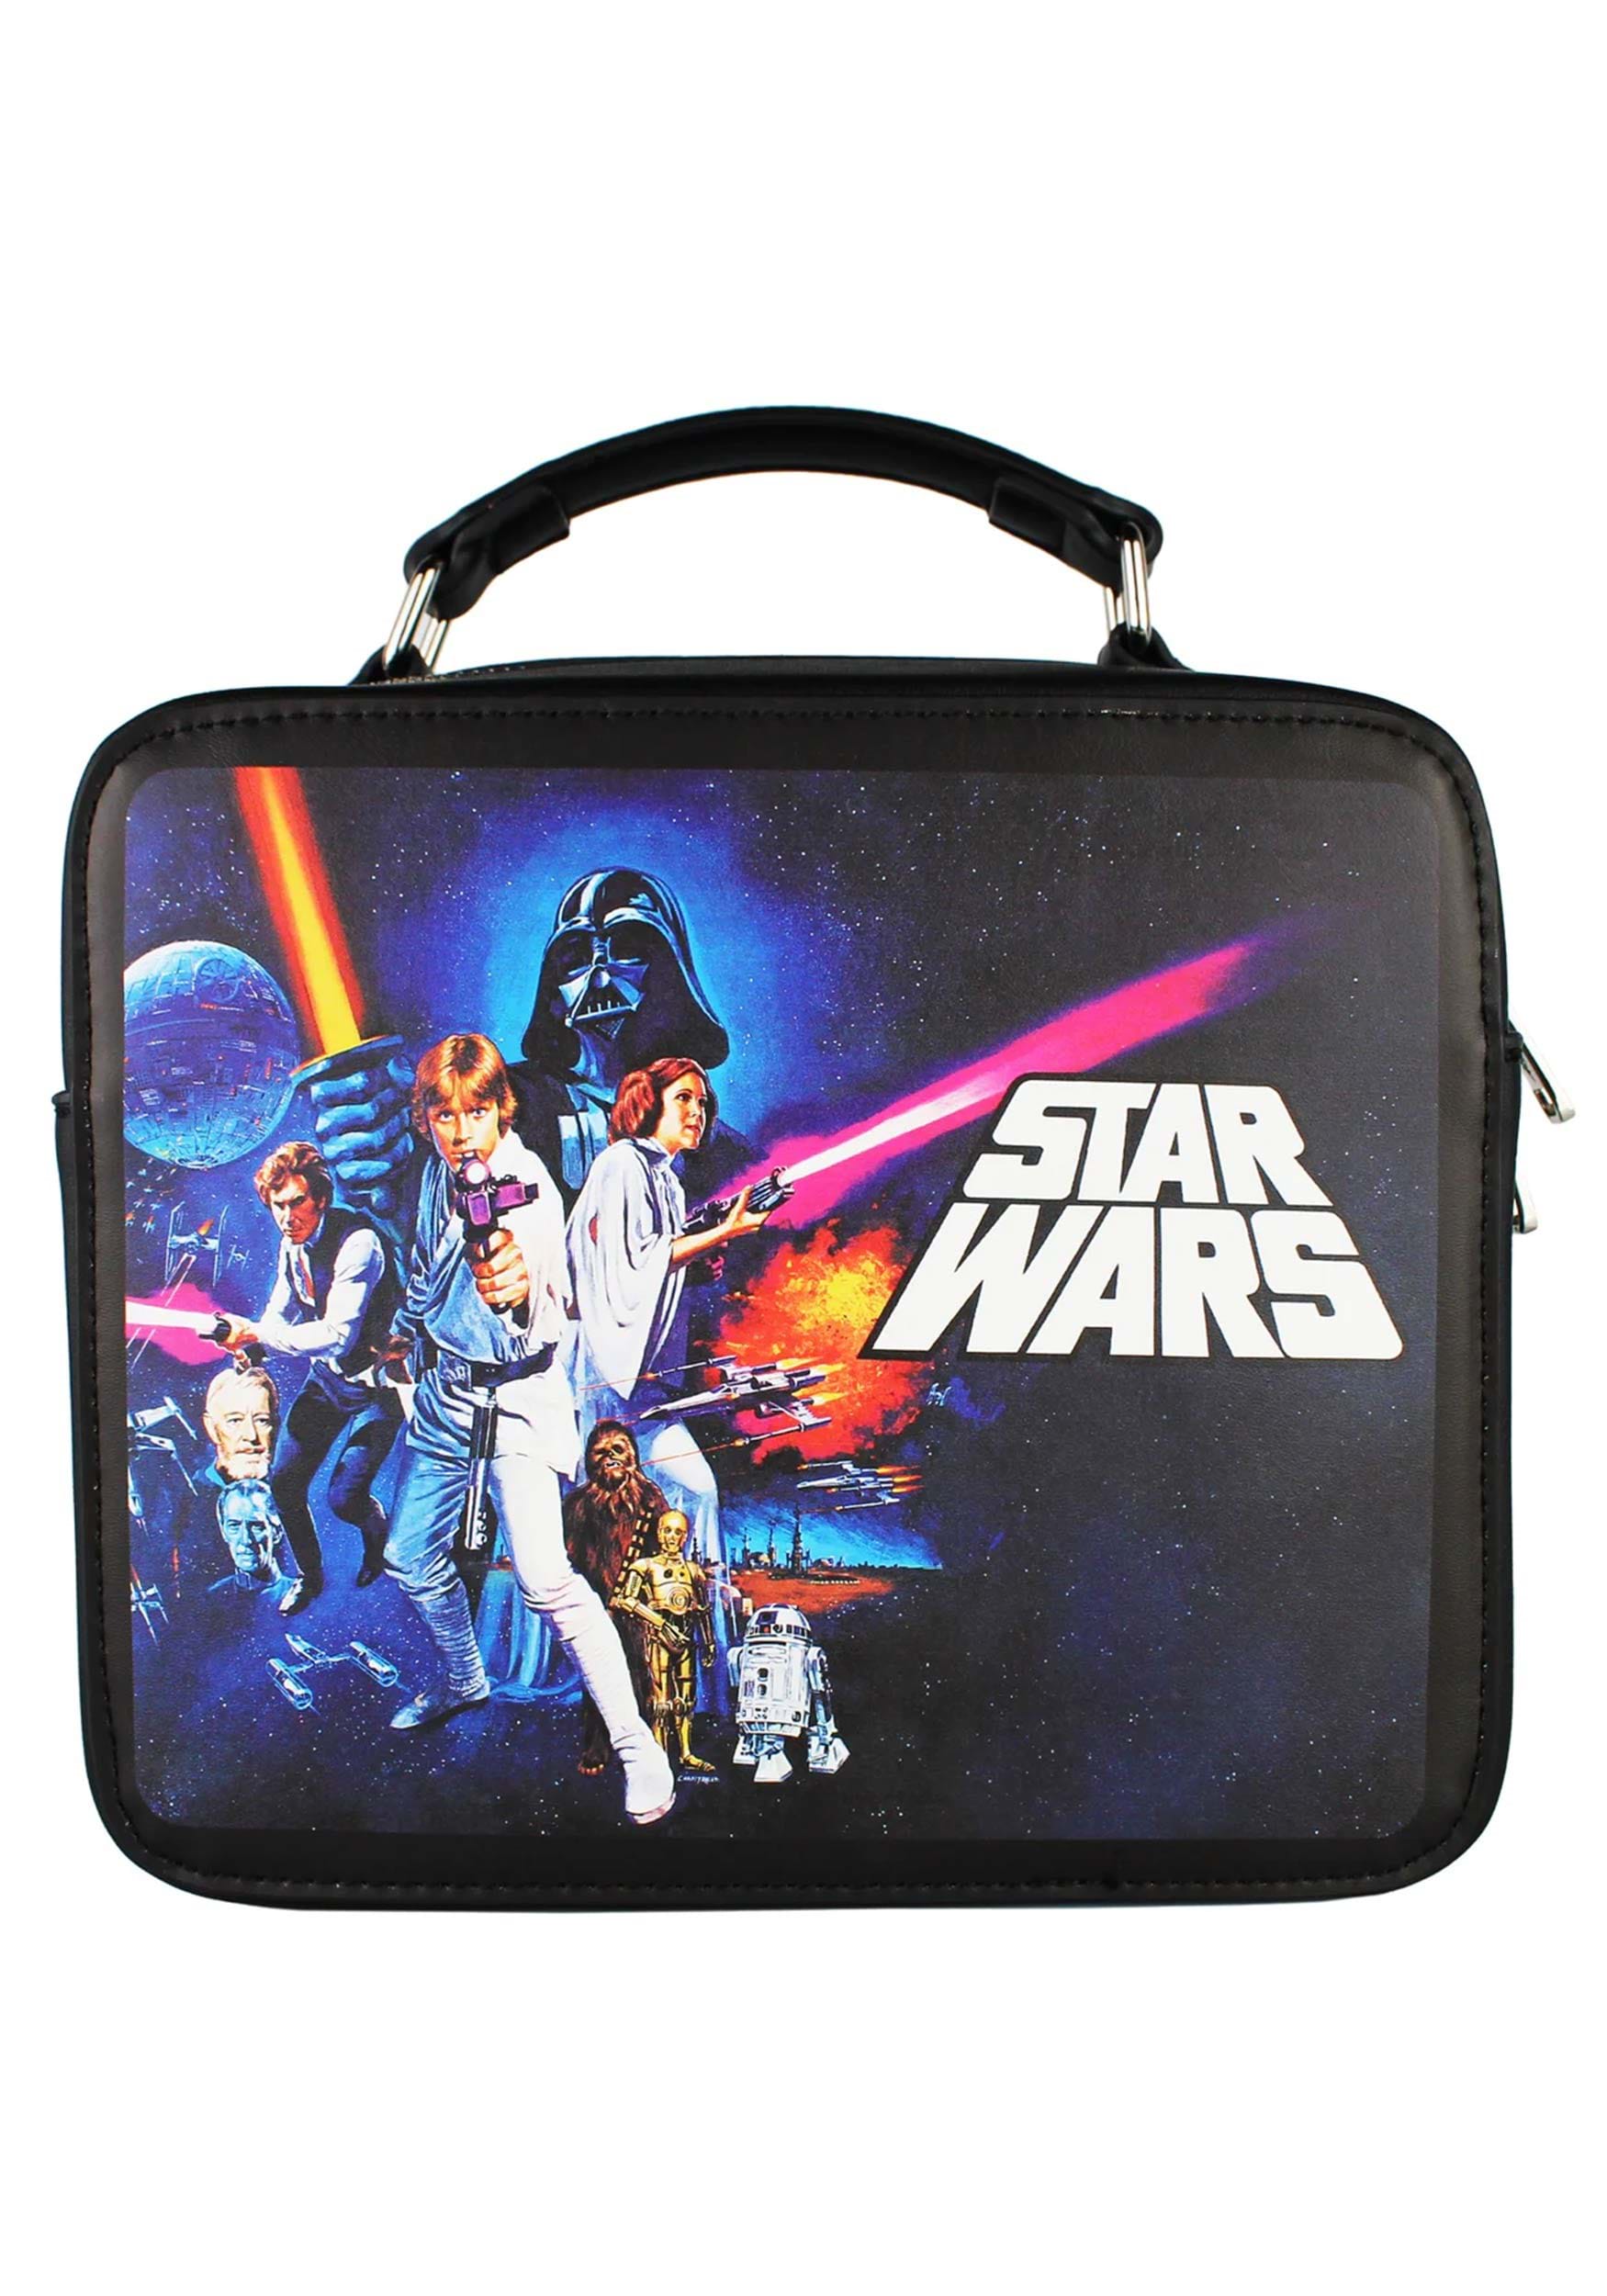 https://images.fun.com/products/92909/1-1/star-wars-lunchbox-purse.jpg